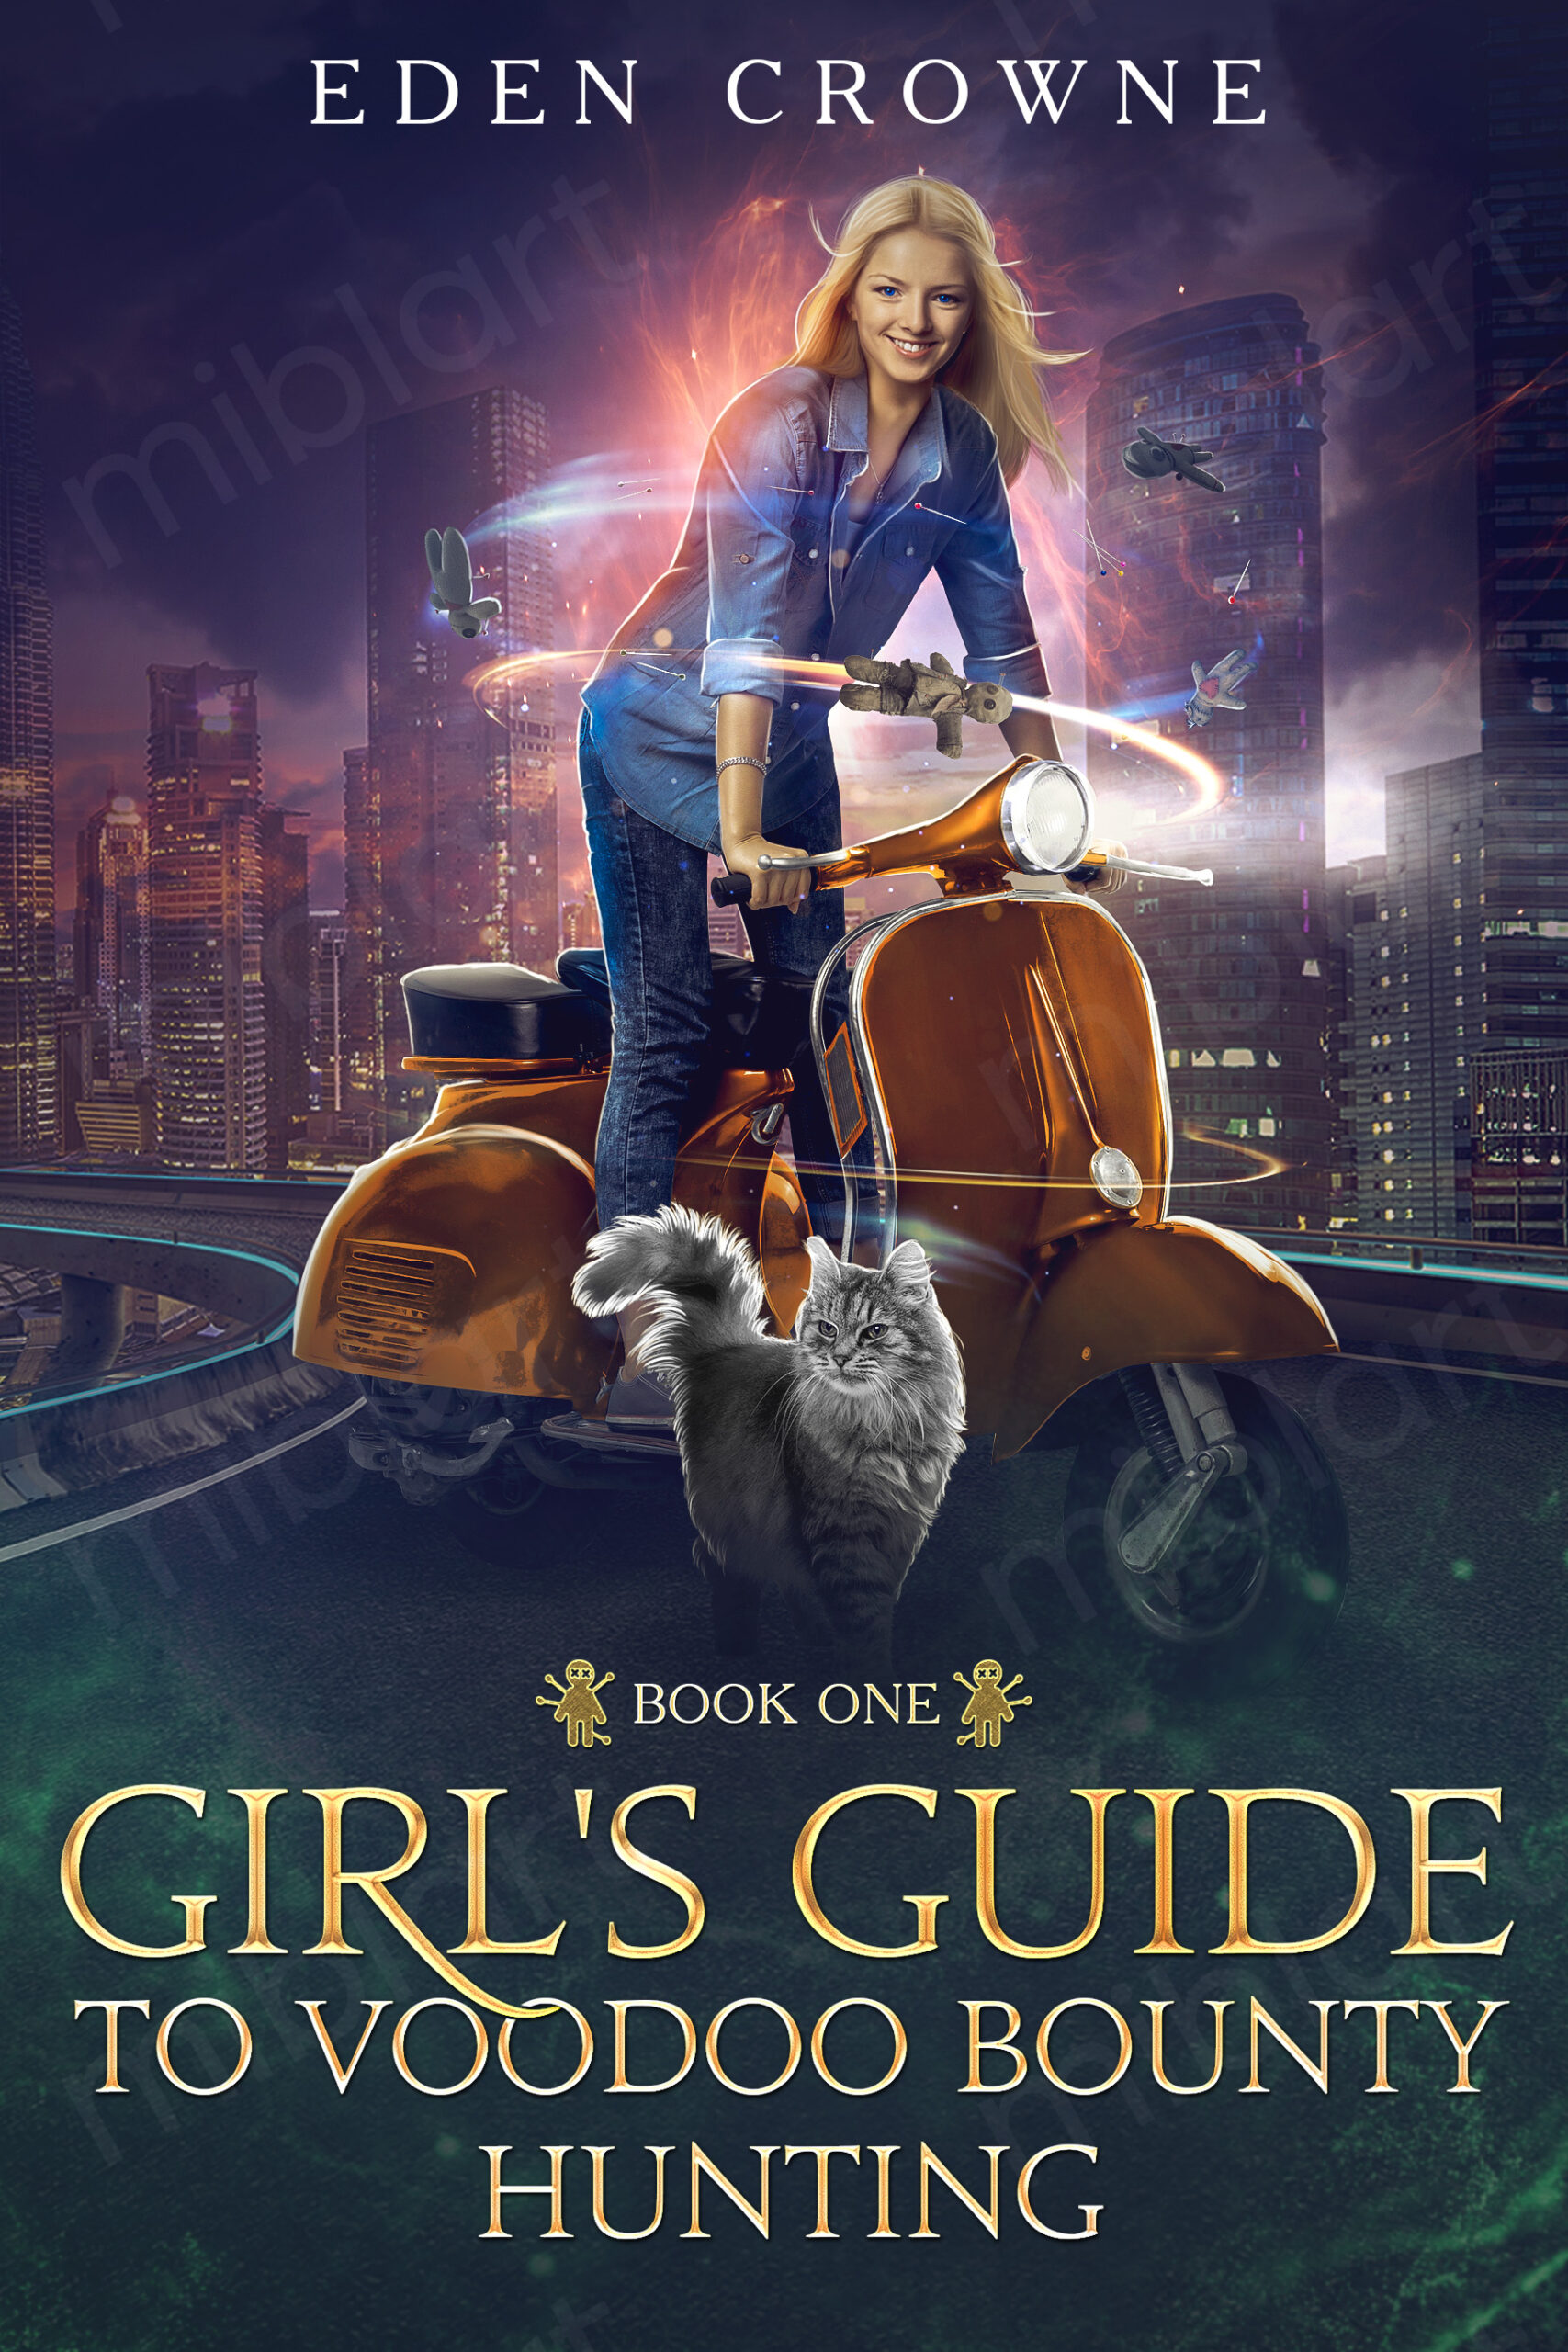 FREE: Girl’s Guide to Voodoo Bounty Hunting 2: Shifty Business by Eden Crowne